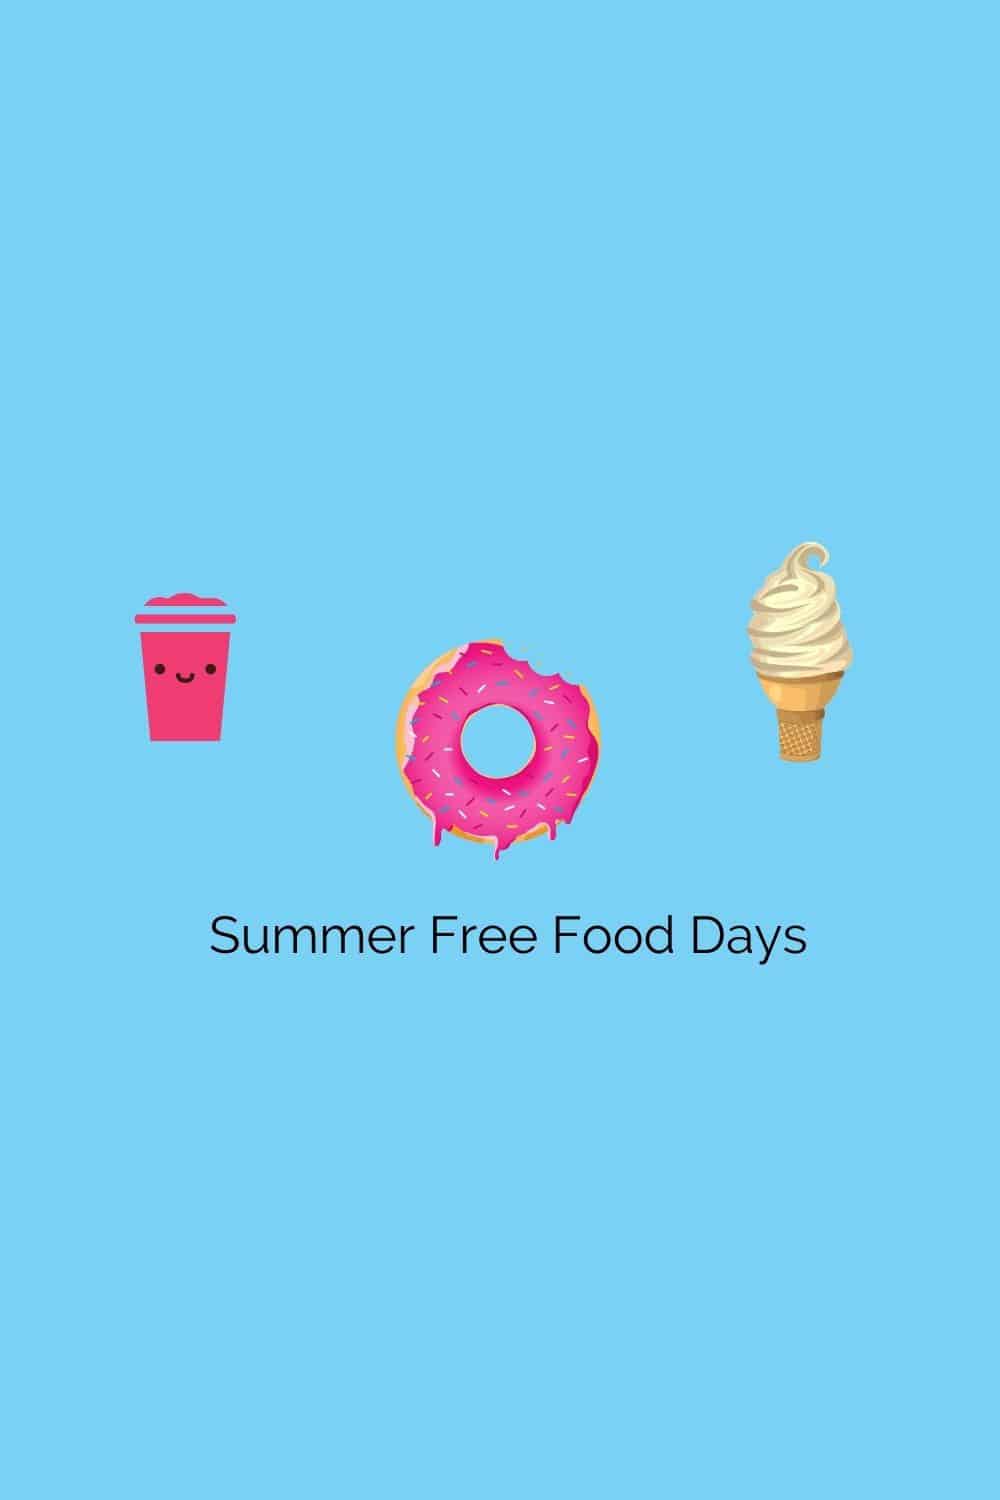 2021 Summer Free Food Days in Nashville, TN and Beyond